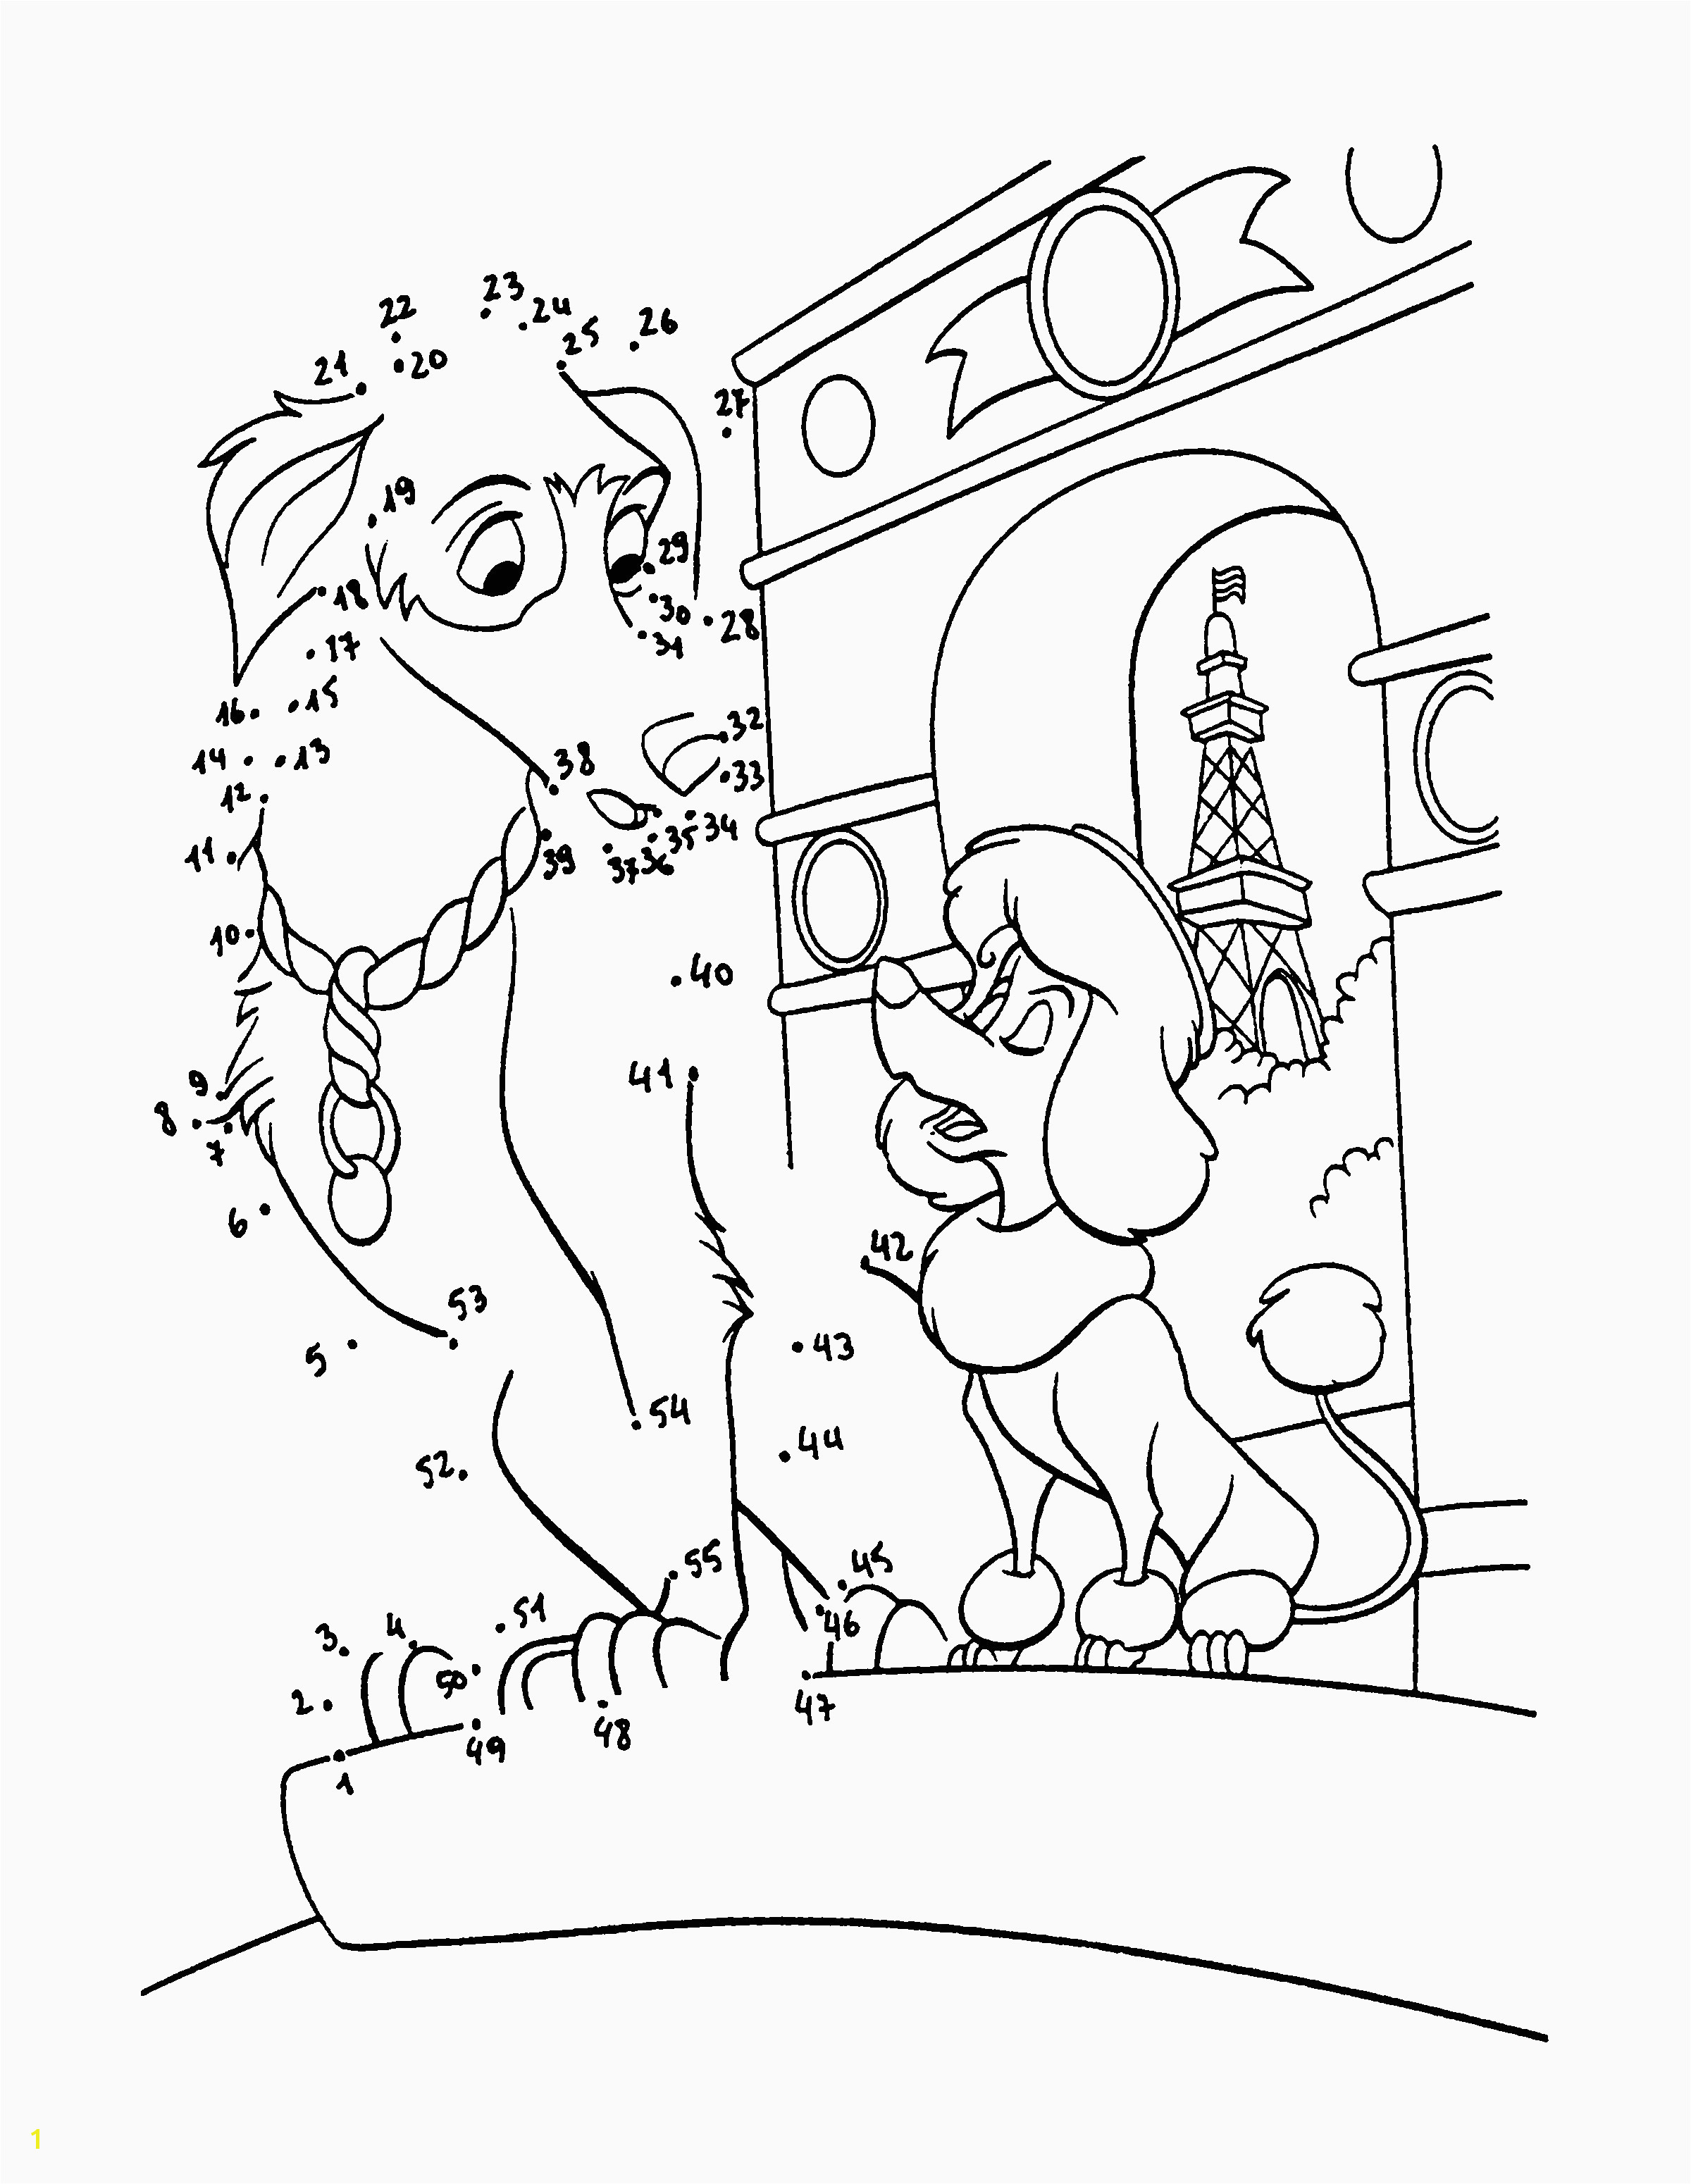 Pencil Sharpener Coloring Page Olaf Coloring Pages Download thephotosync